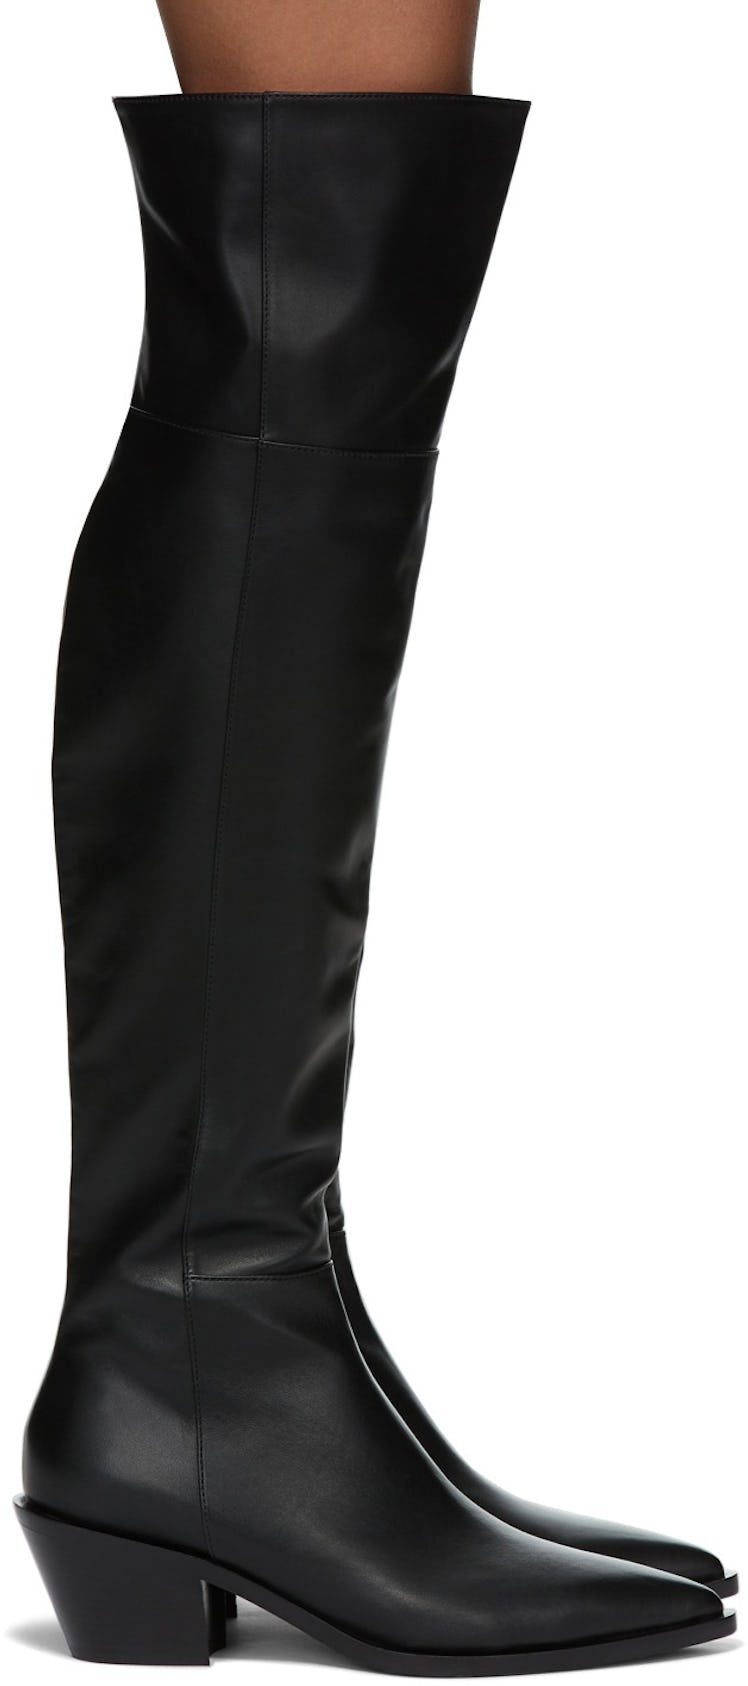 Black Over-The-Knee Boots from Gianvito Rossi, available to shop on SSENSE.